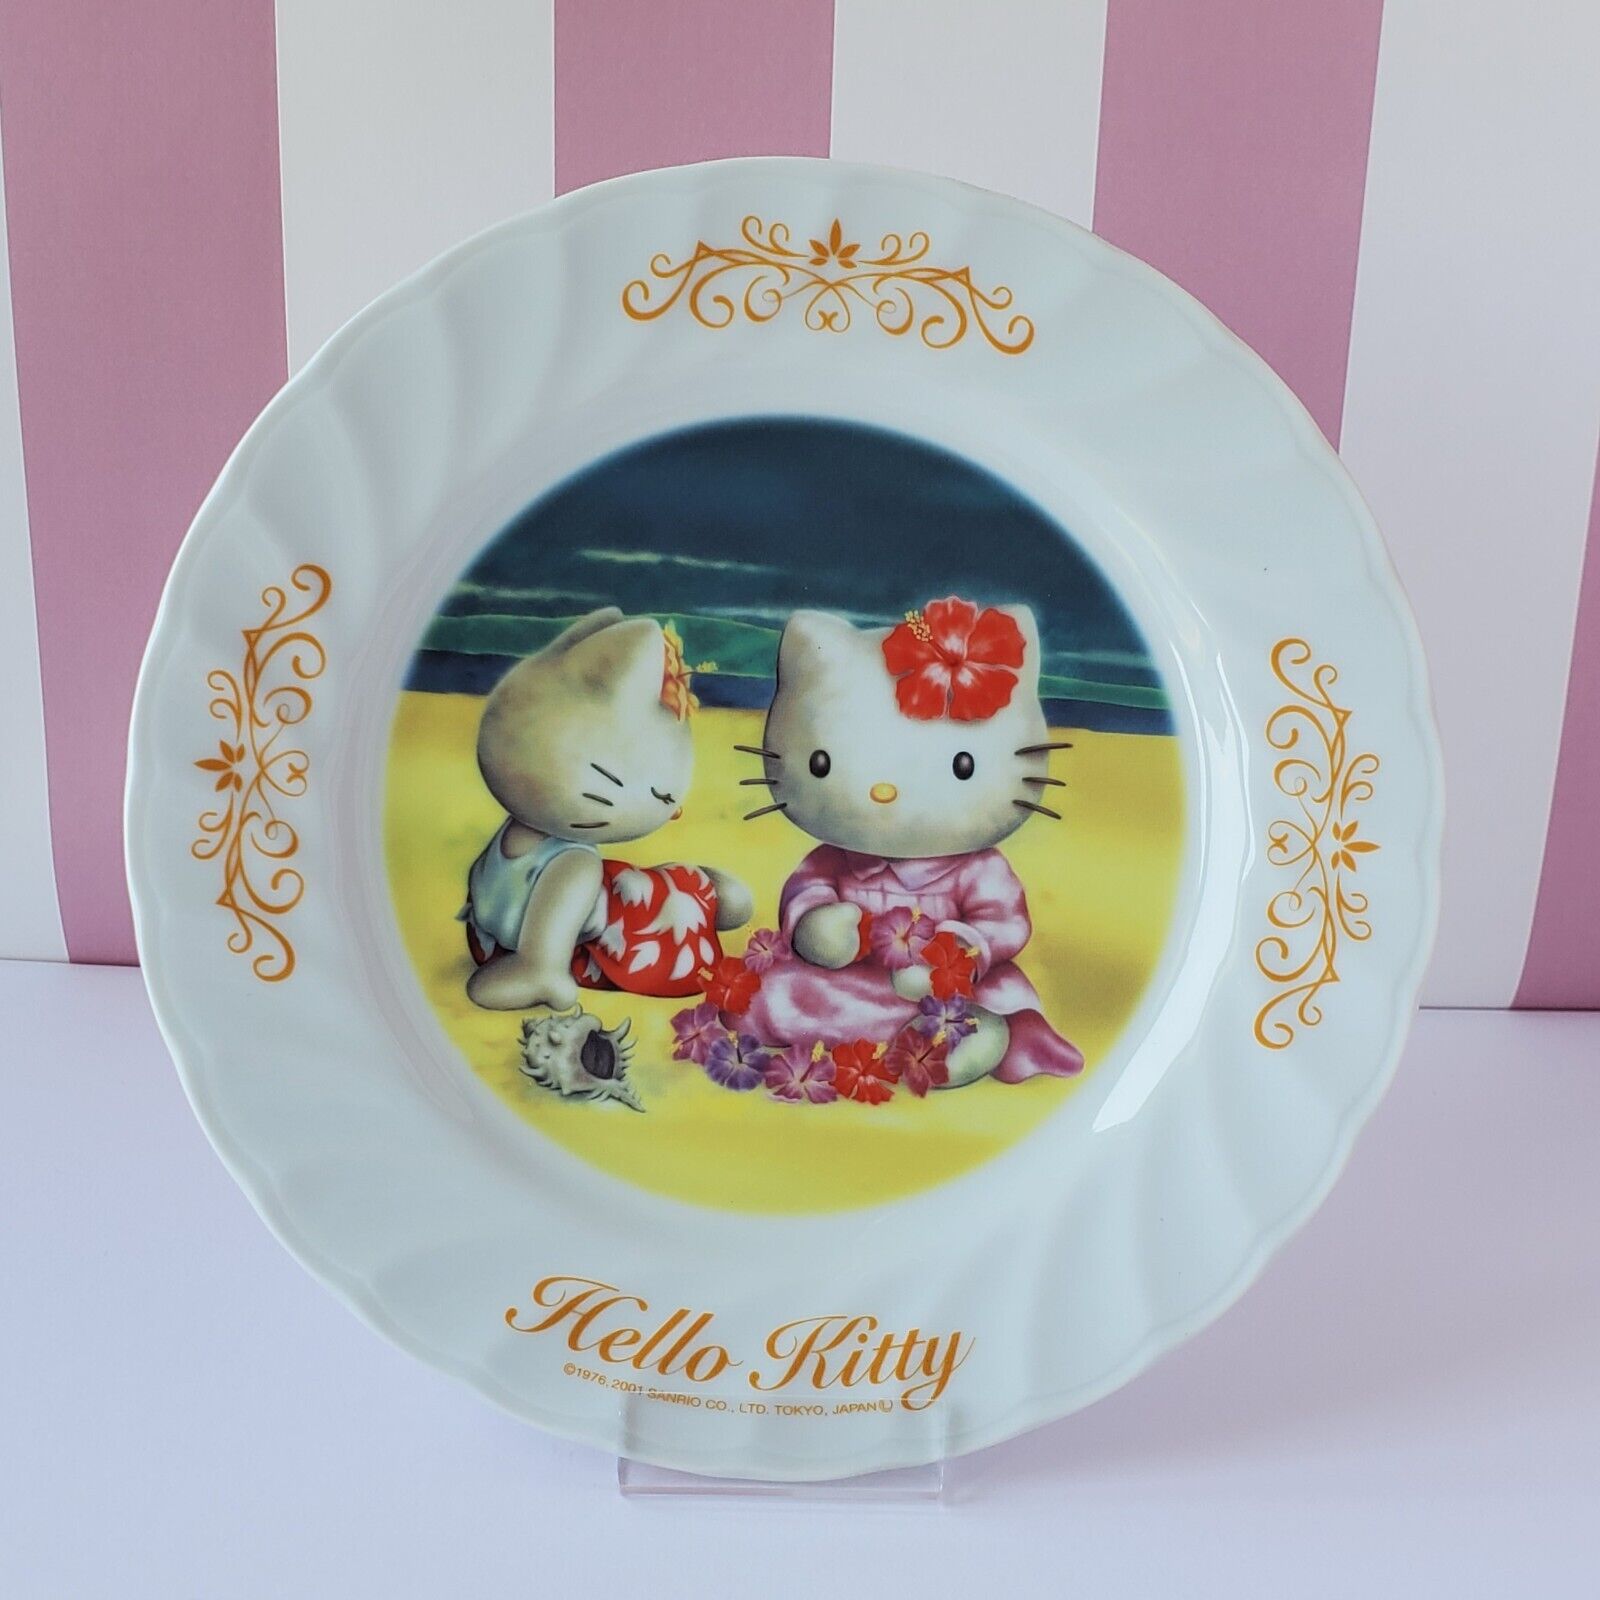 Vintage Sanrio Hello Kitty Decorative Plate made in 2001 Japan